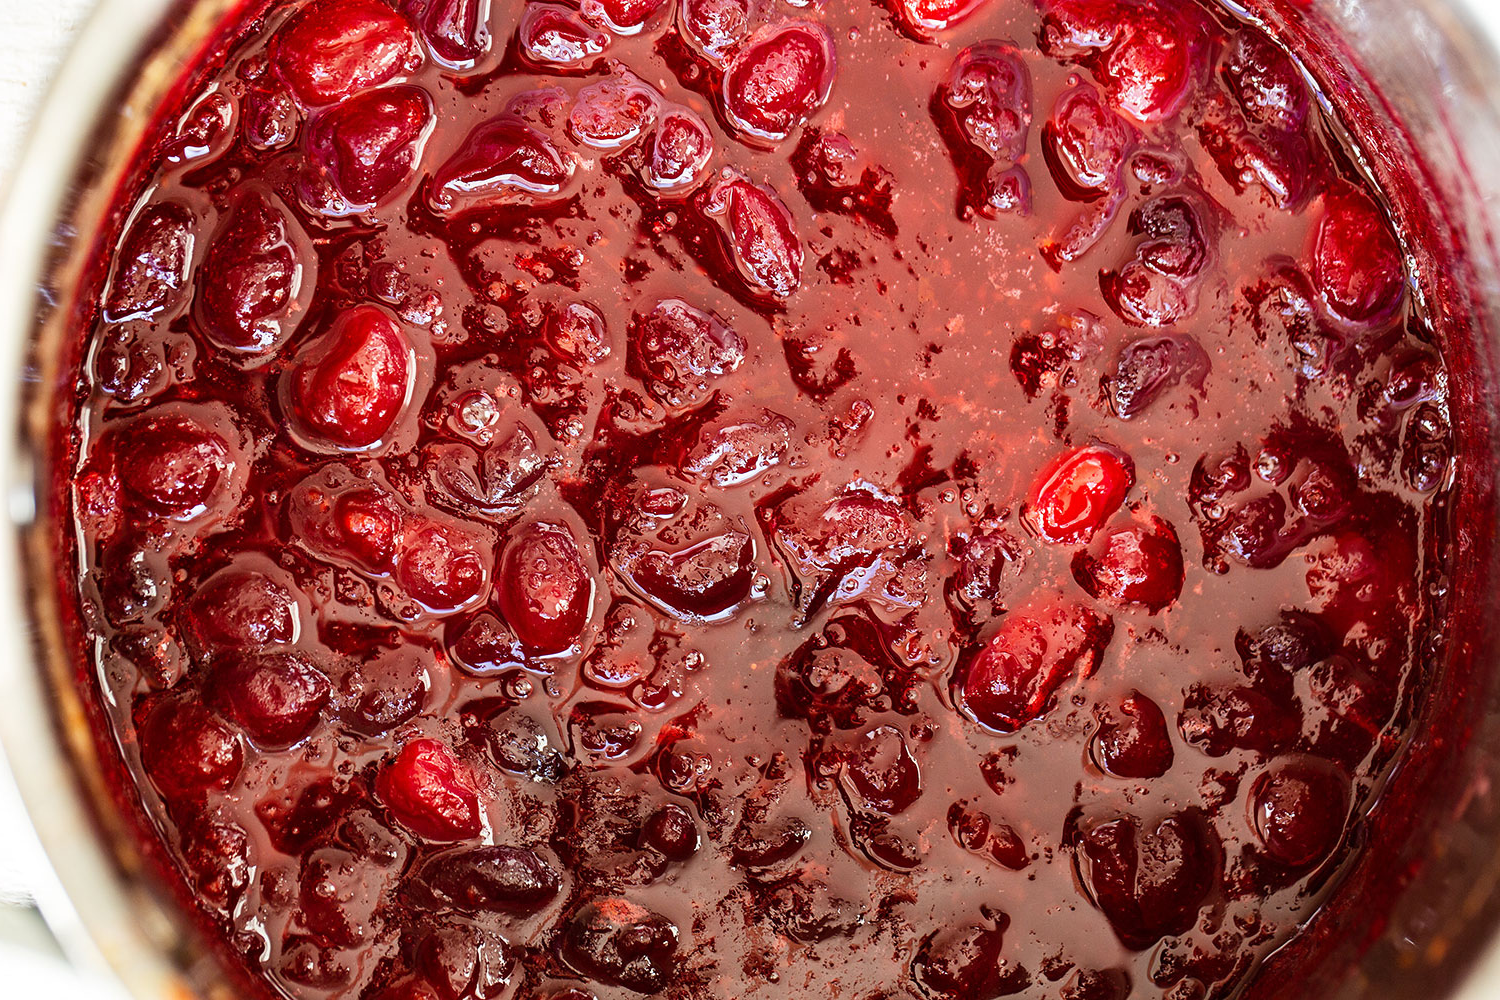 closeup of this cranberry sauce, with some whole berries and orange zest visible.